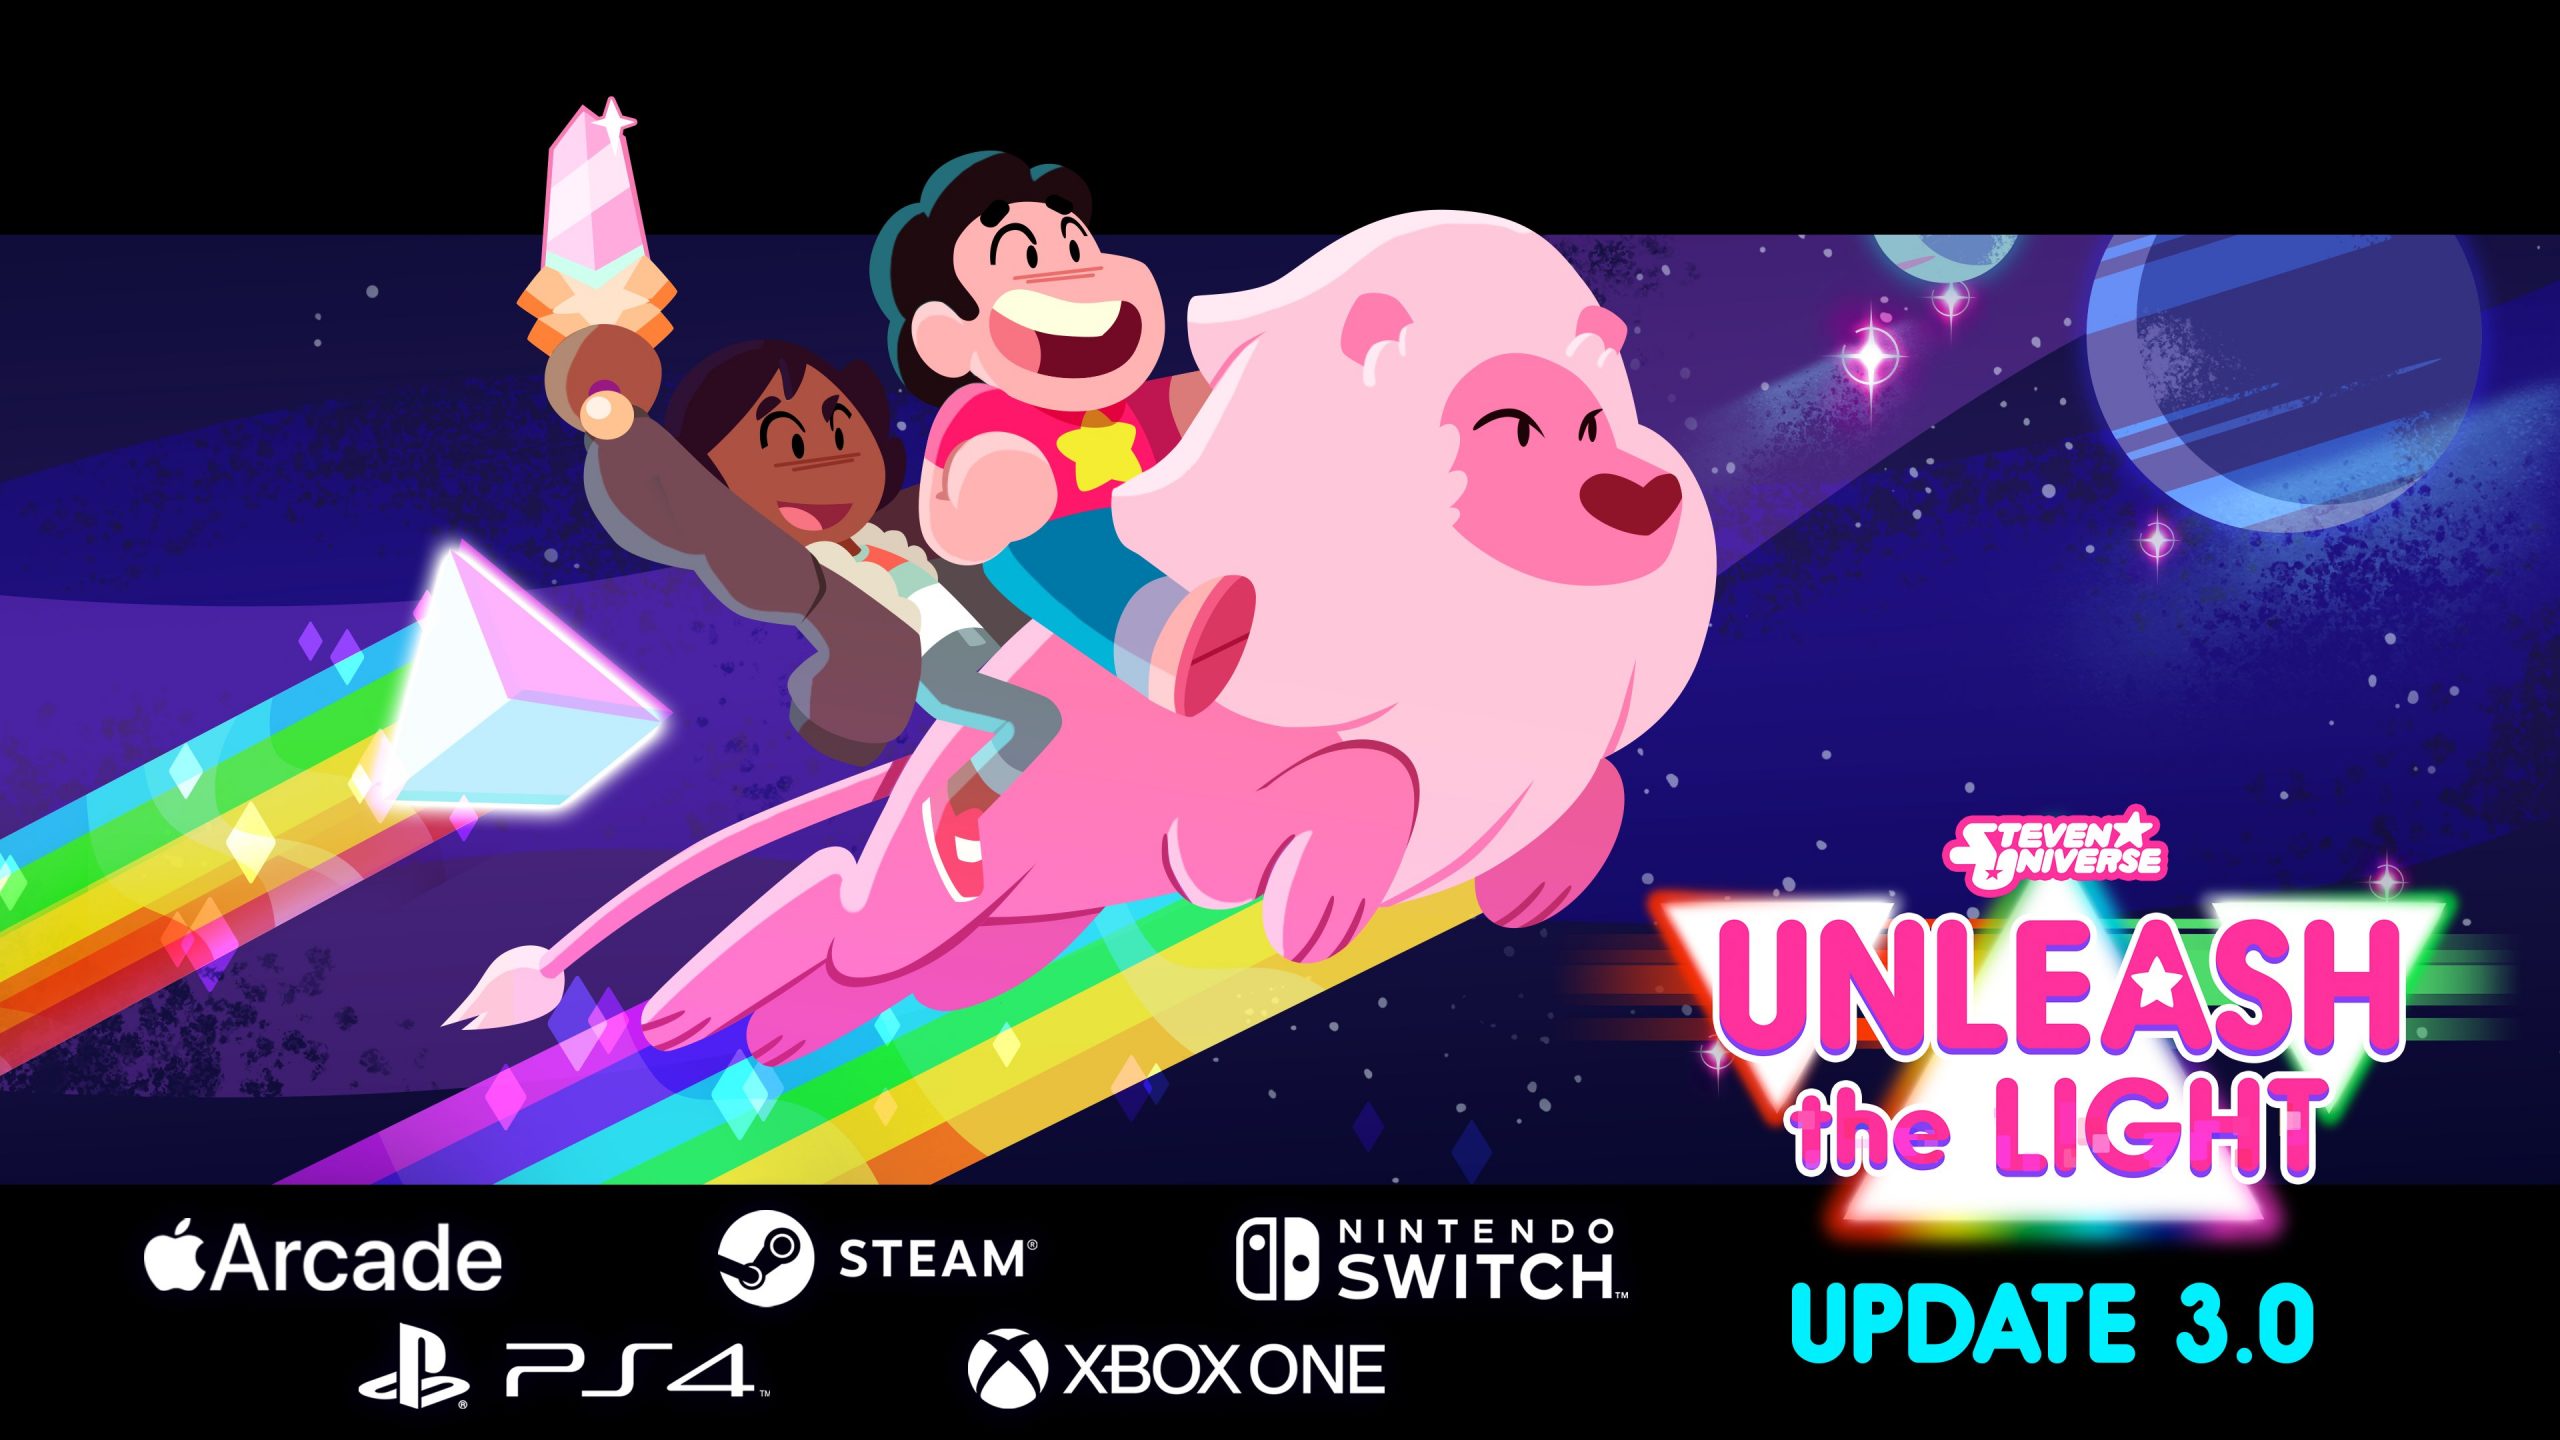 Steven Light update out now on Switch 3.0.0), patch notes